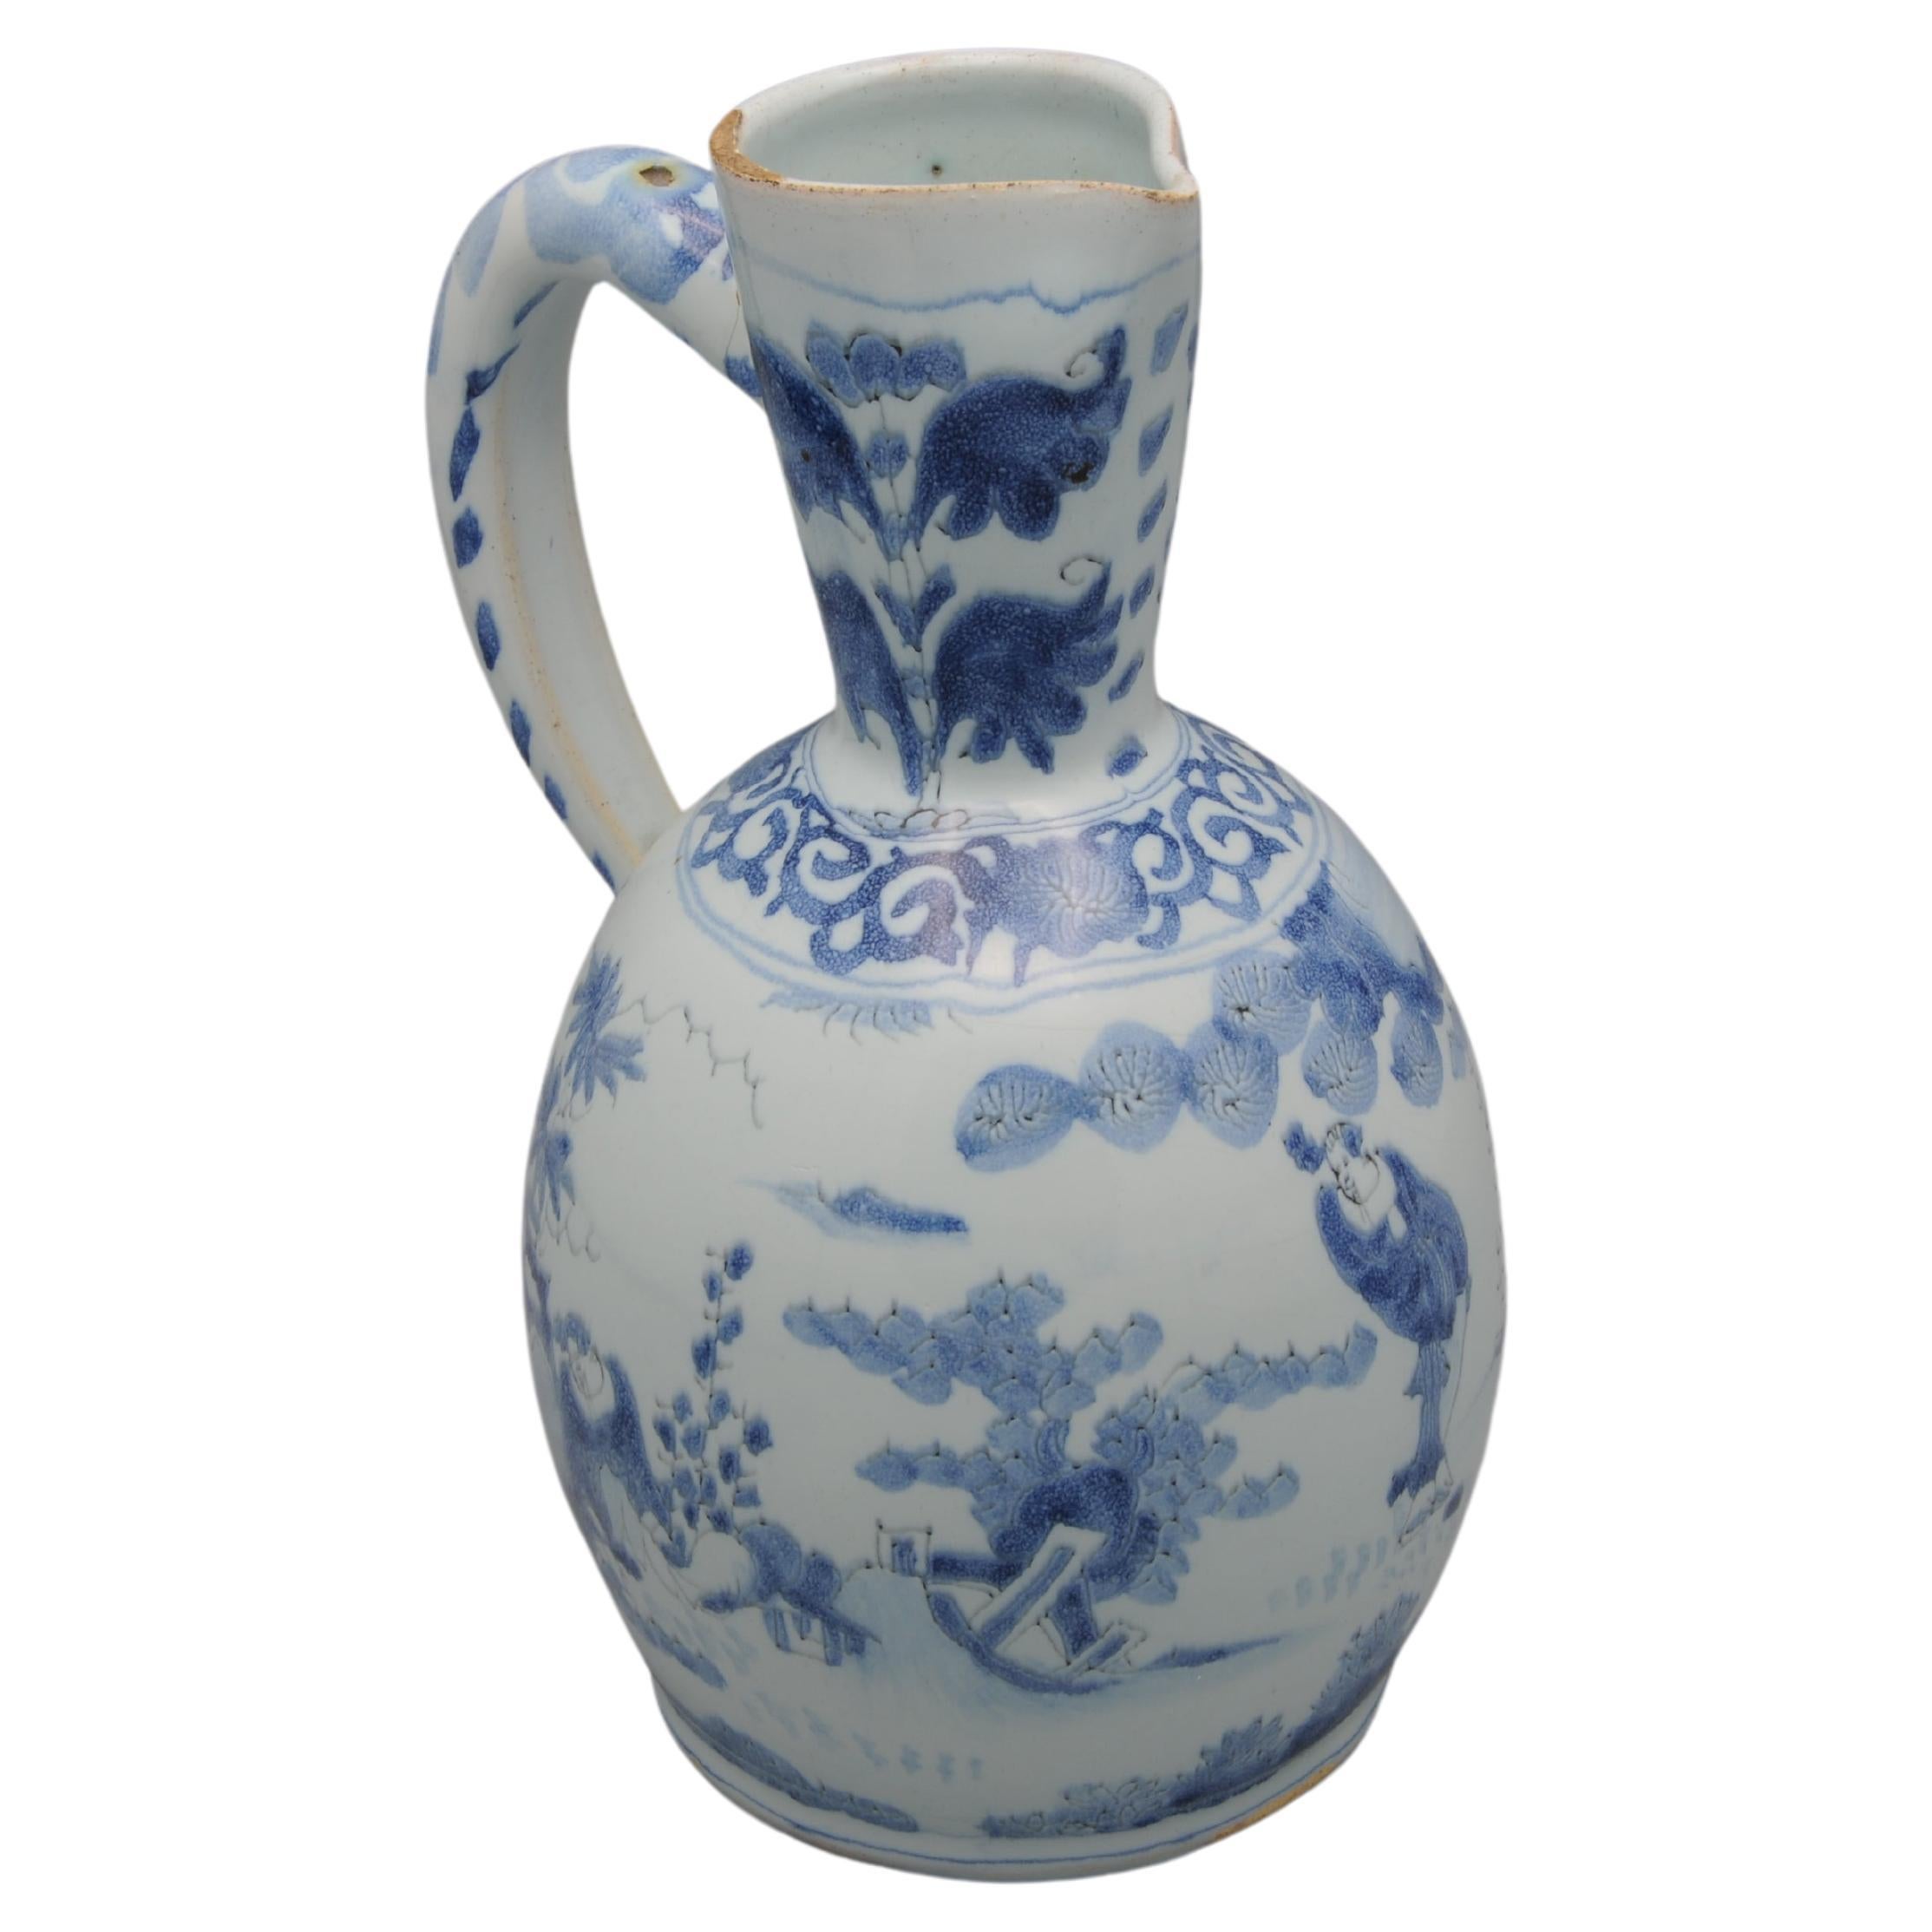 Dutch Delftware pouring jug with soft blue decoration of a chinoiserie landscape with persons. The neck with two stylised flowers above a lambrequin border at the neck, the handle with a scrollwork pattern. Wanli style decoration
